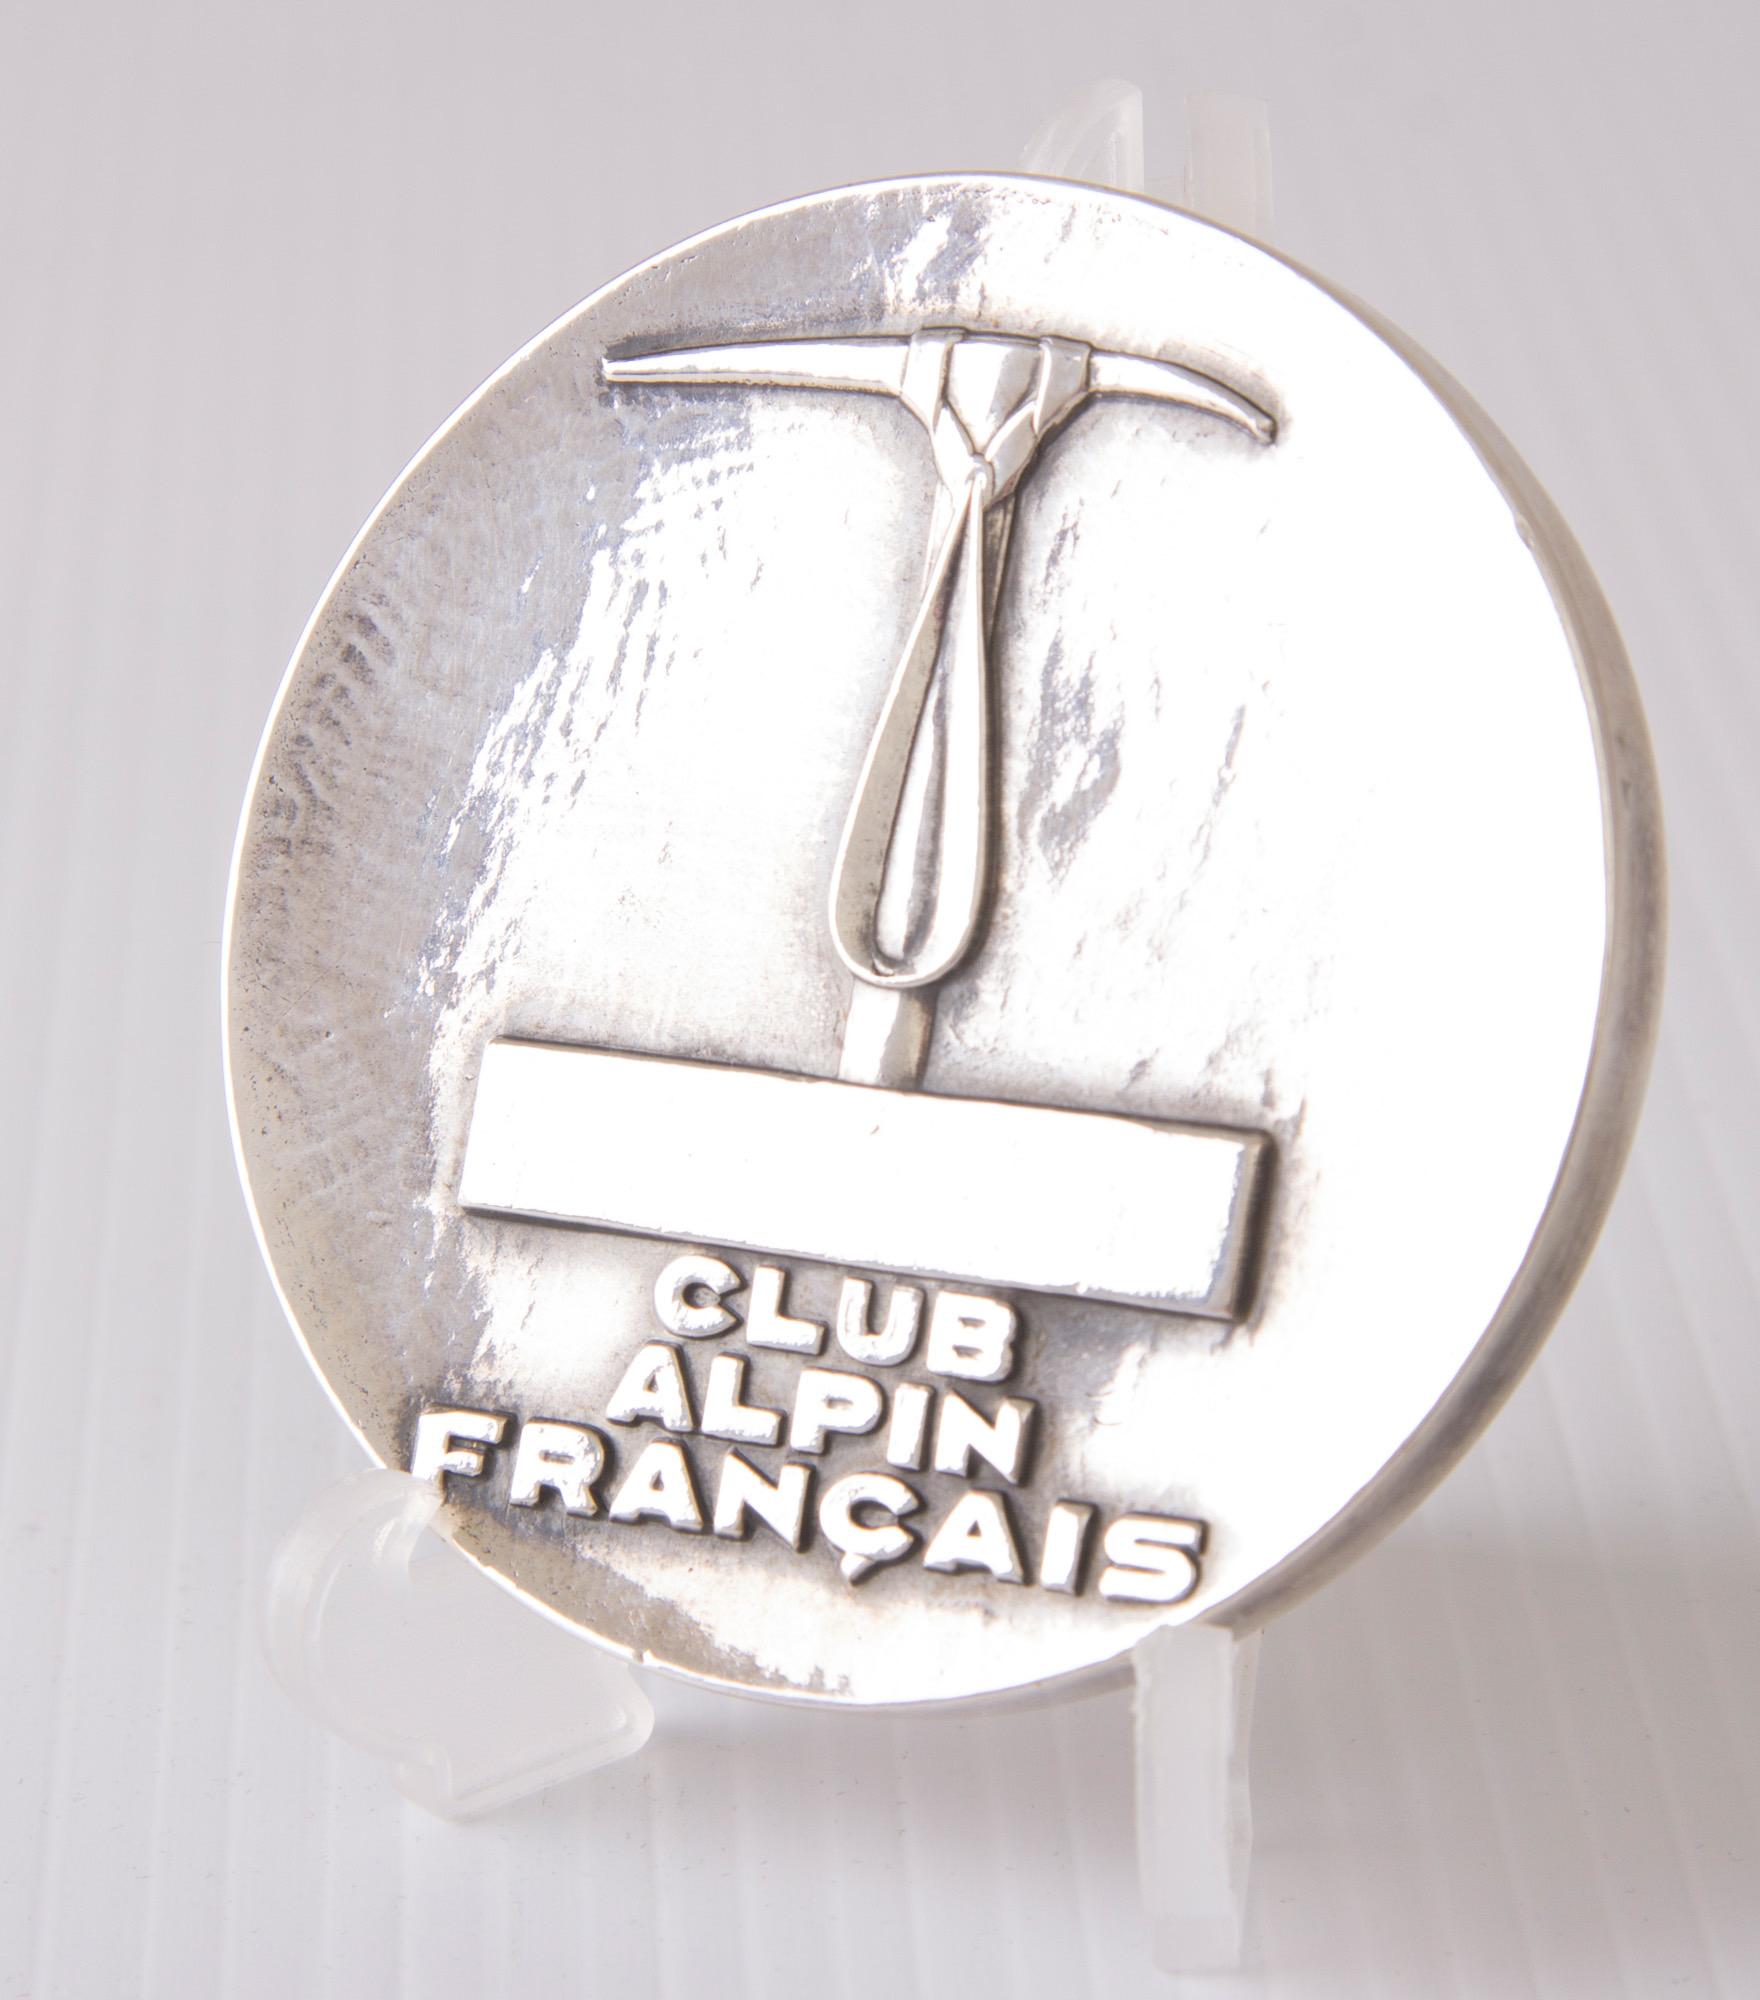 Art Deco silvered bronze Medal for Club Alpin Francais depicting a skier looking to the mountains.
signed Raymond Templier
Measures: H 7 cm, W 7 cm, D 1 cm
French, circa 1930.